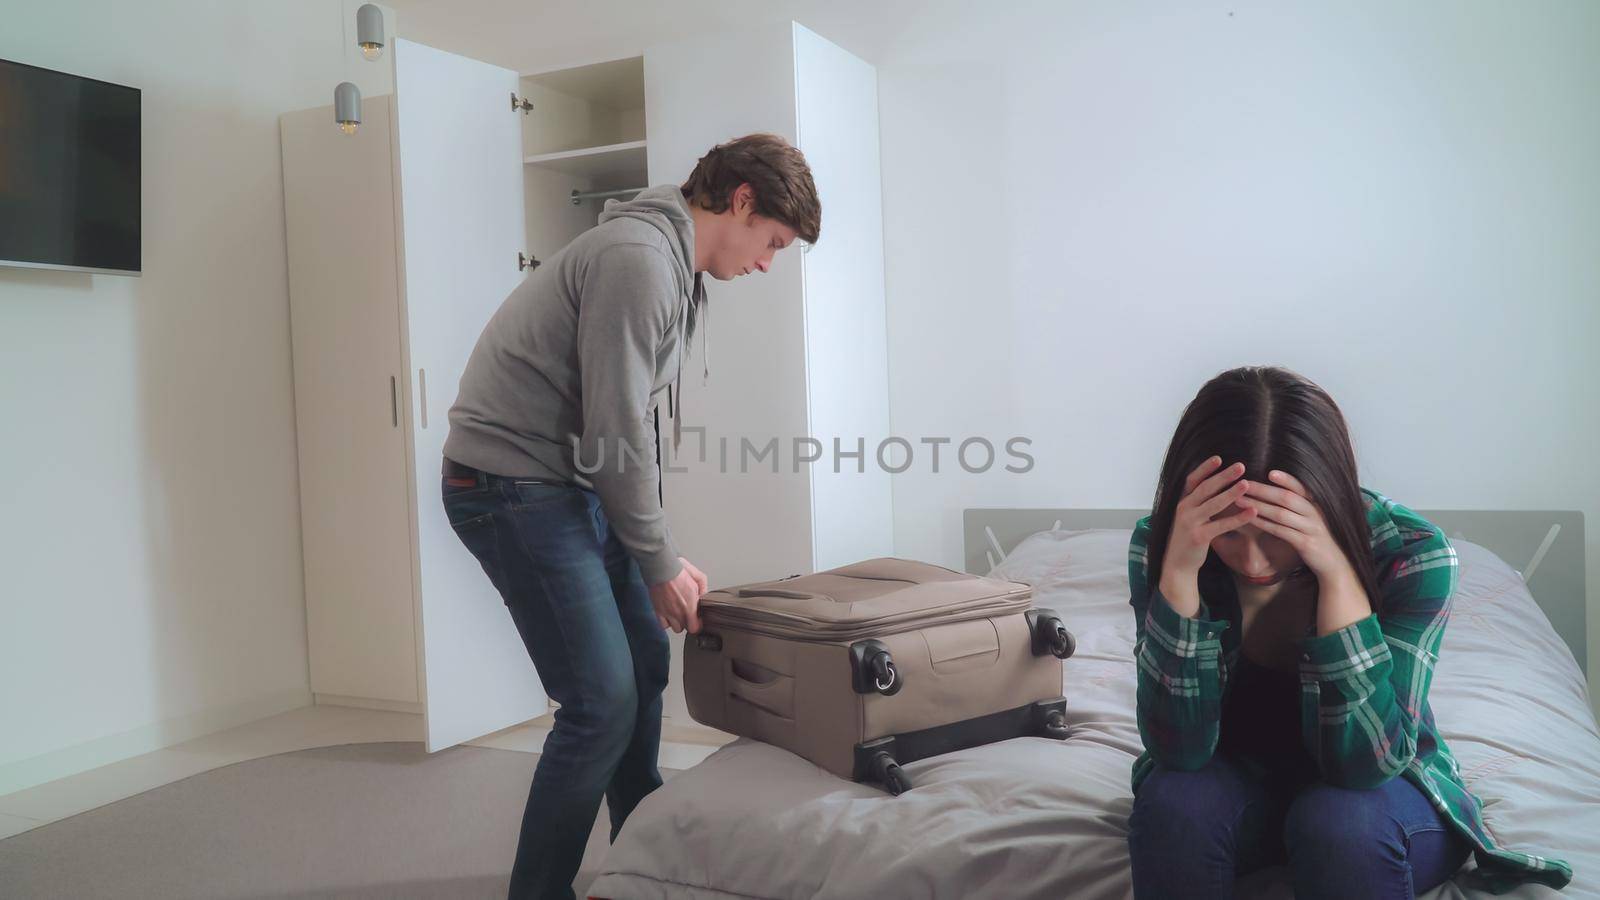 Husband and wife quarreled. Young man packing clothes in suitcase. Upset woman sitting on the bed. Girlfriend and boyfriend at home. Flat with casual interior.